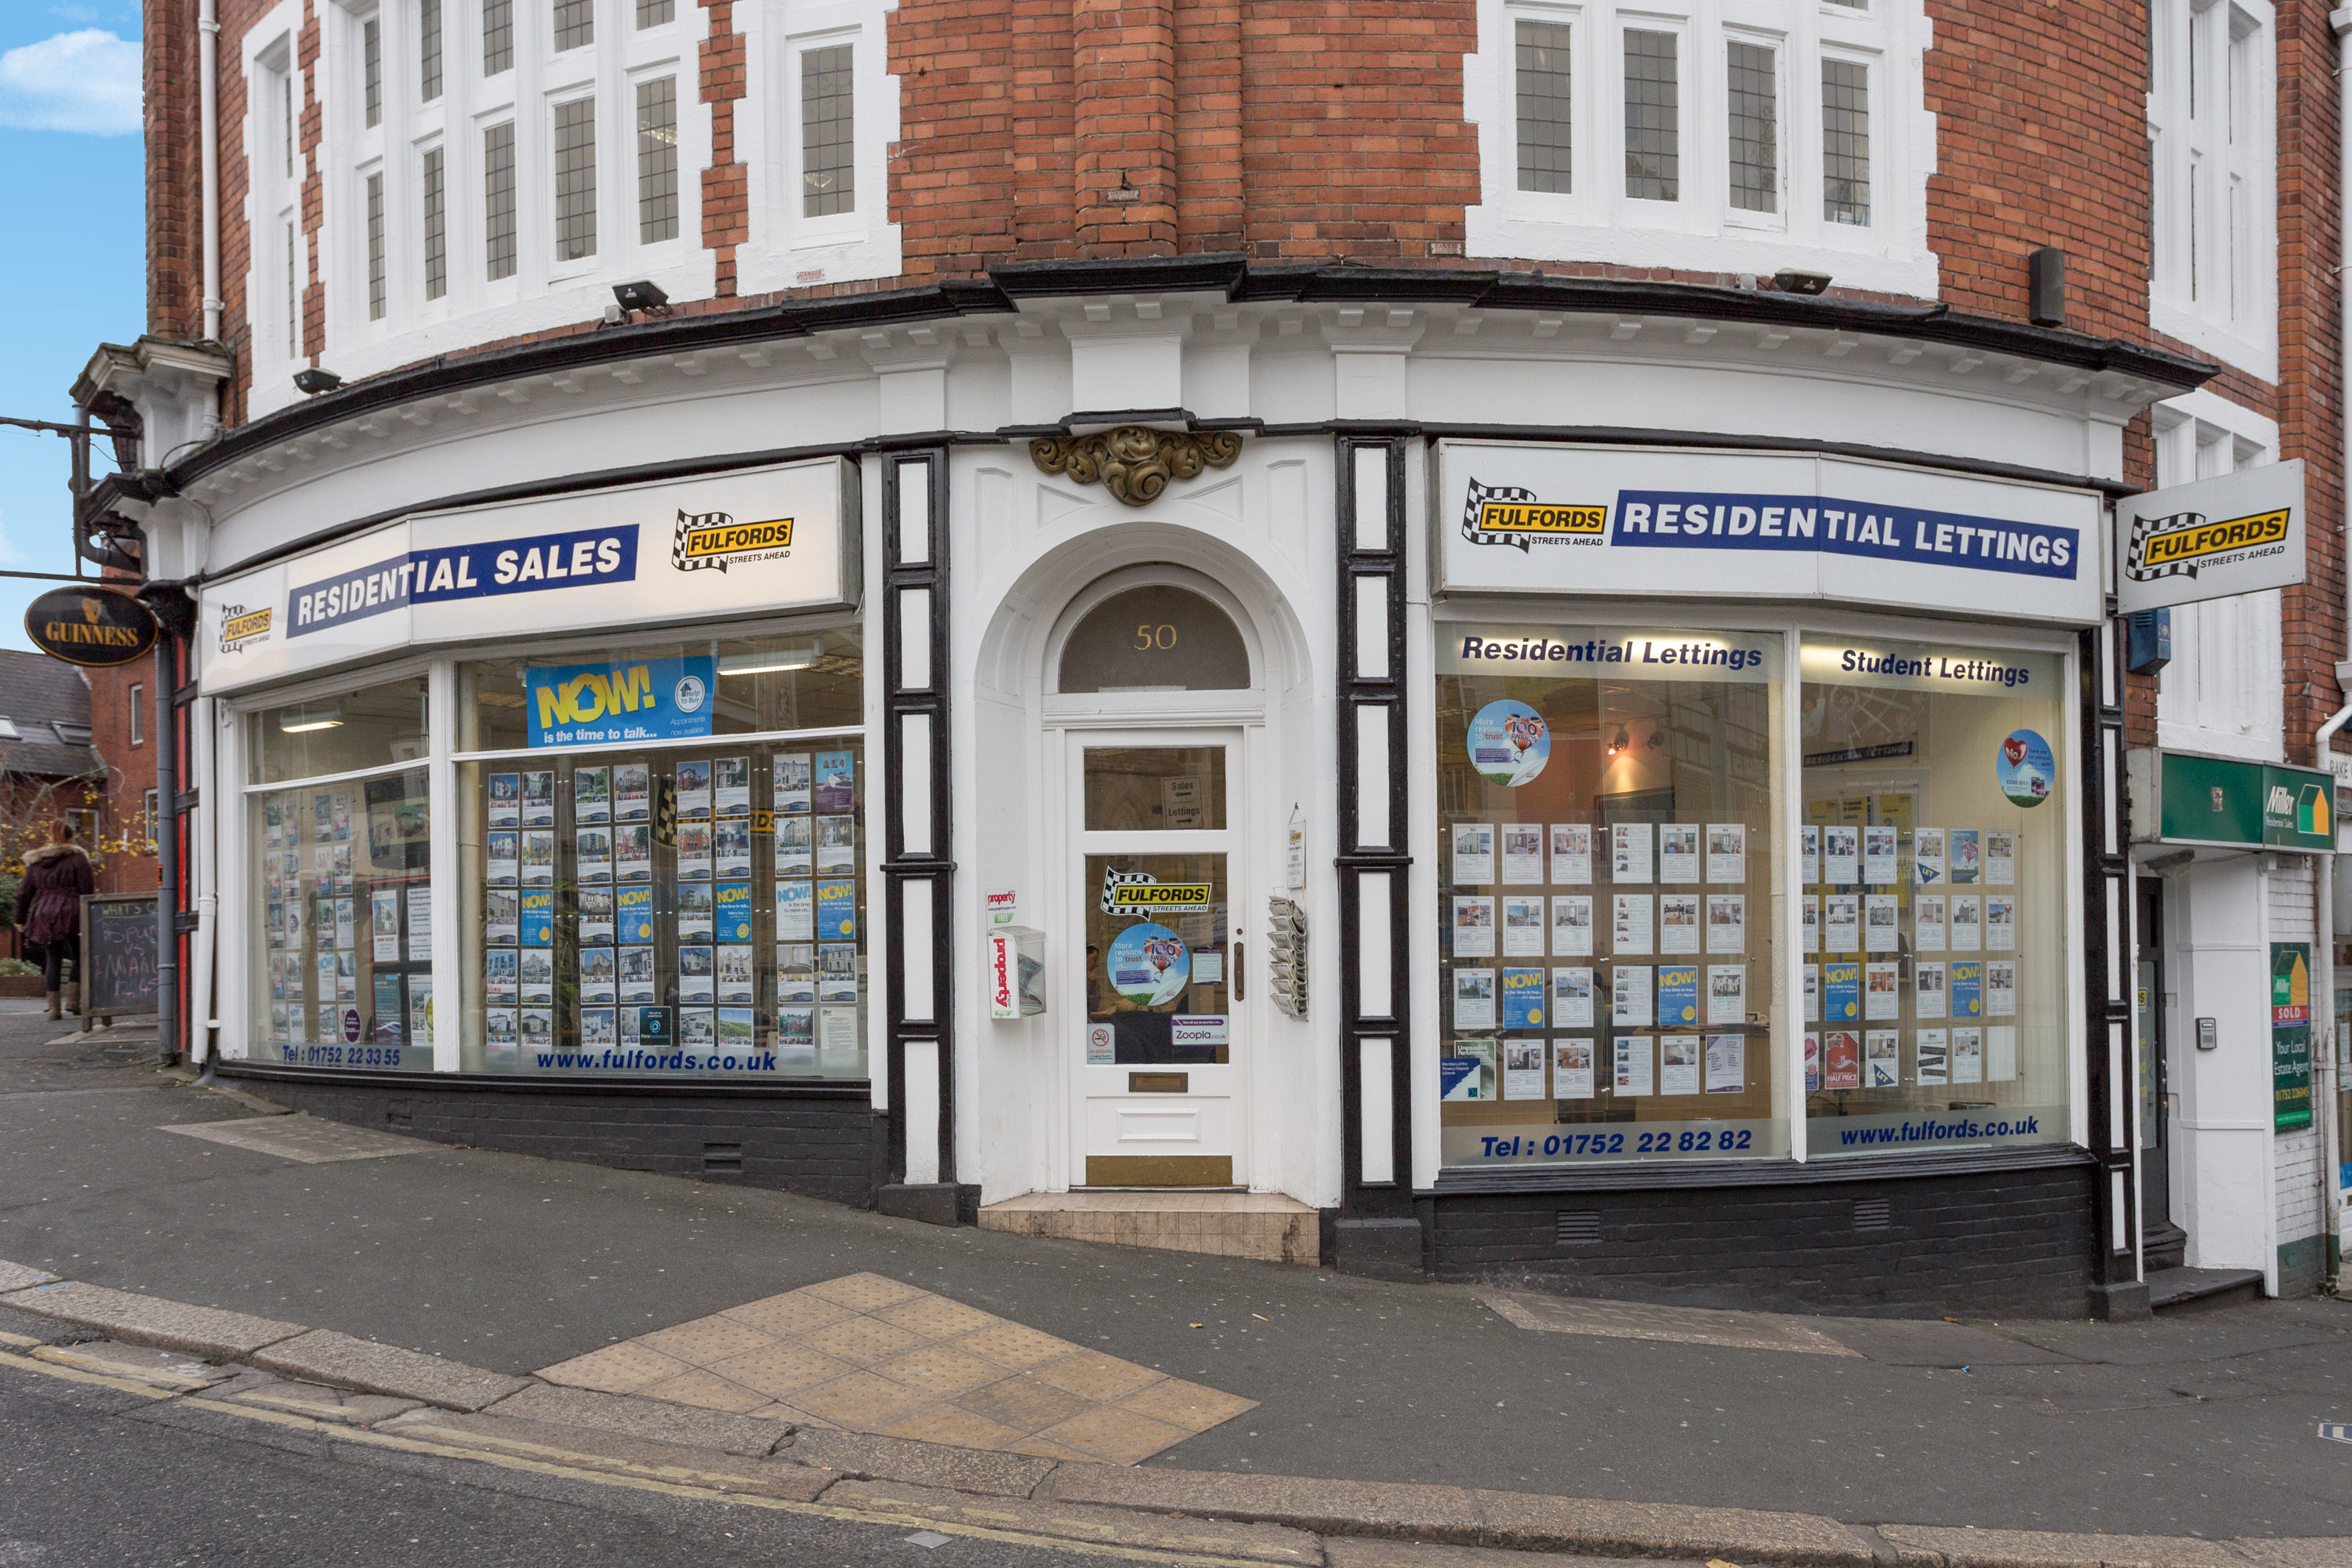 Images Fulfords Sales and Letting Agents Plymouth